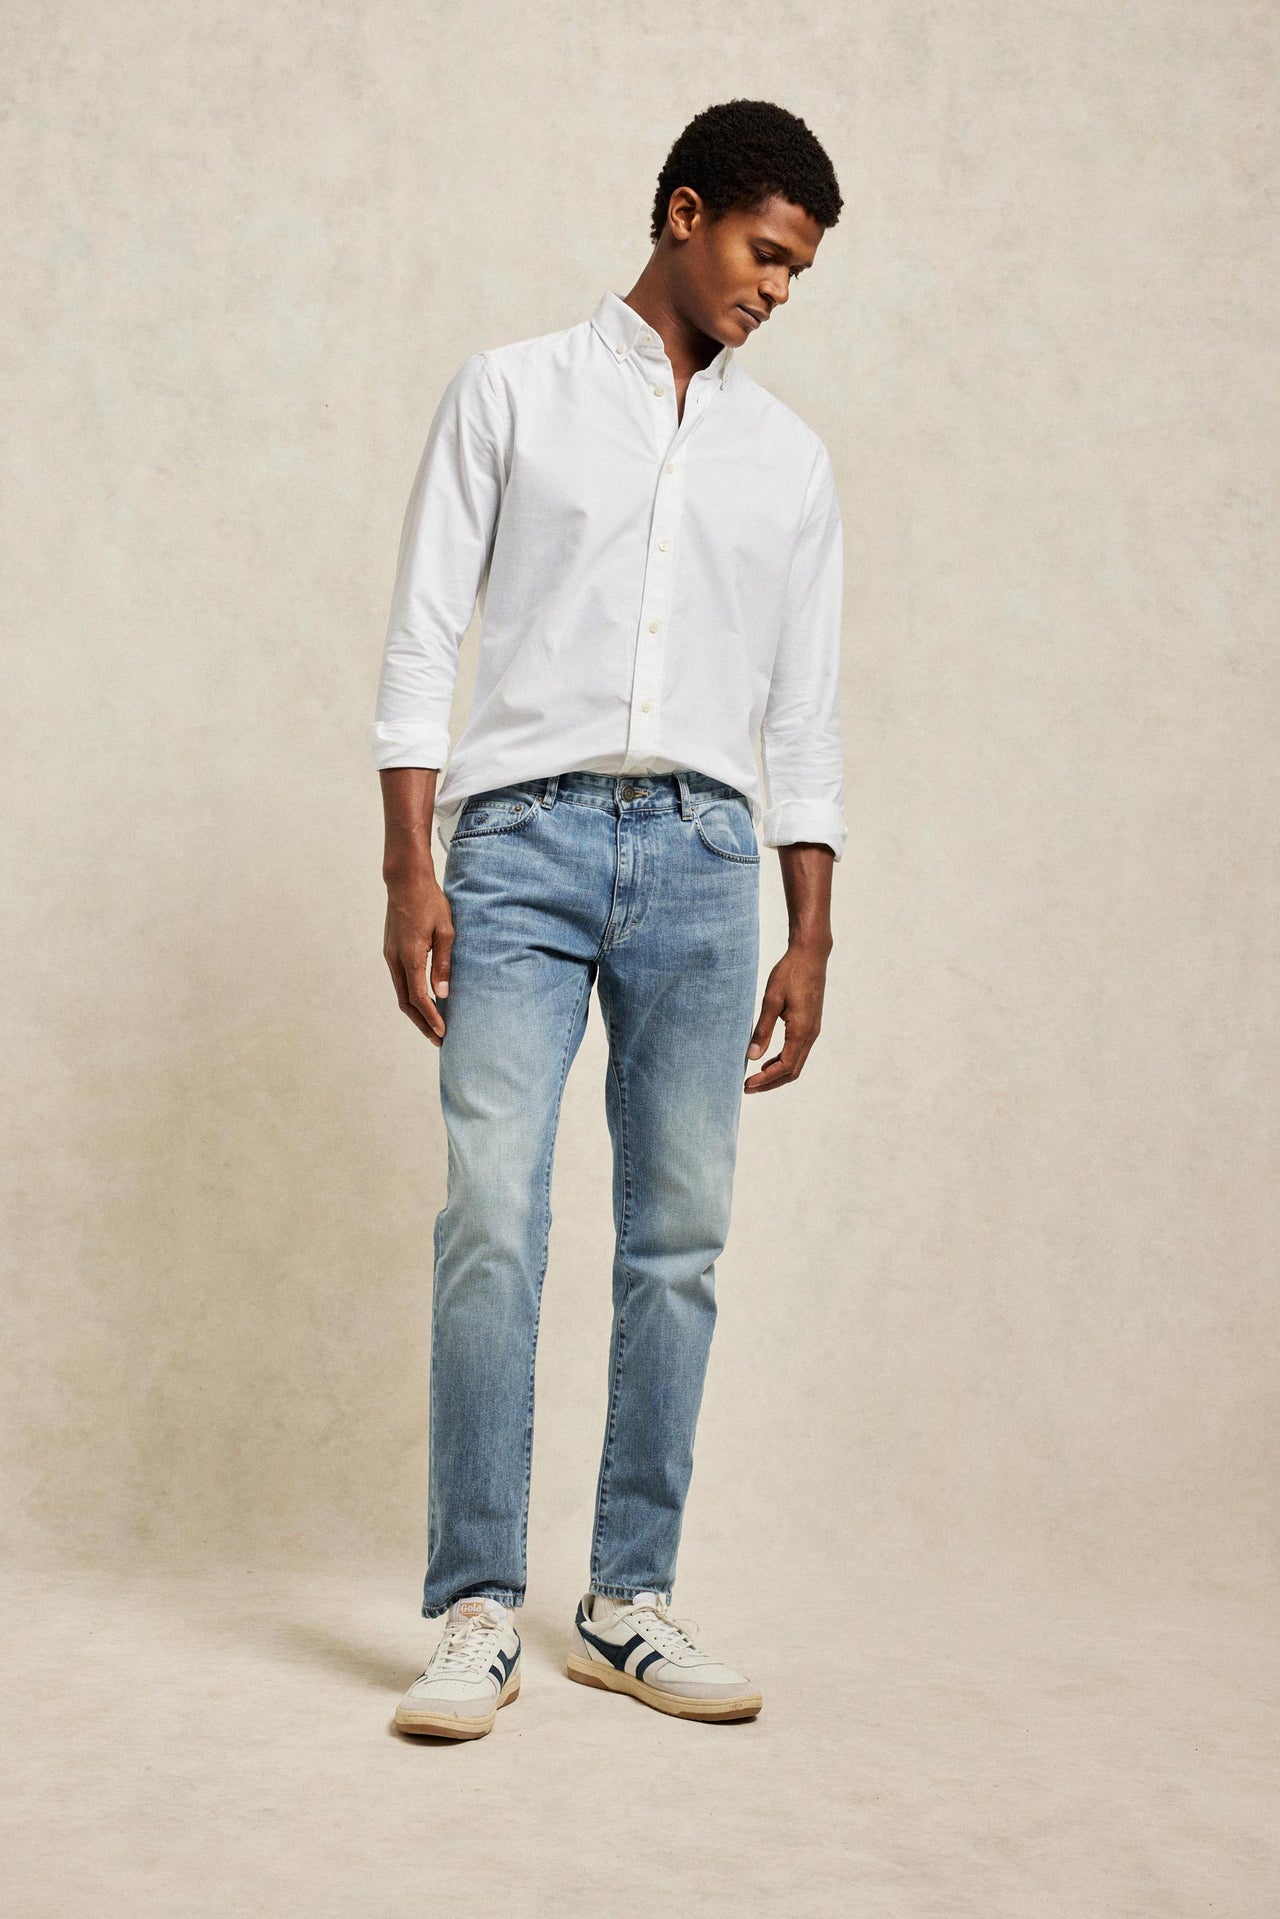 Classic 5 pocket men’s straight cut jeans in a light wash denim. Cut from 100% pure cotton denim to a straight-leg profile in a light-blue wash. Made in Portugal. Casual wear. Machine wash. Size 30,32,34,36,38.